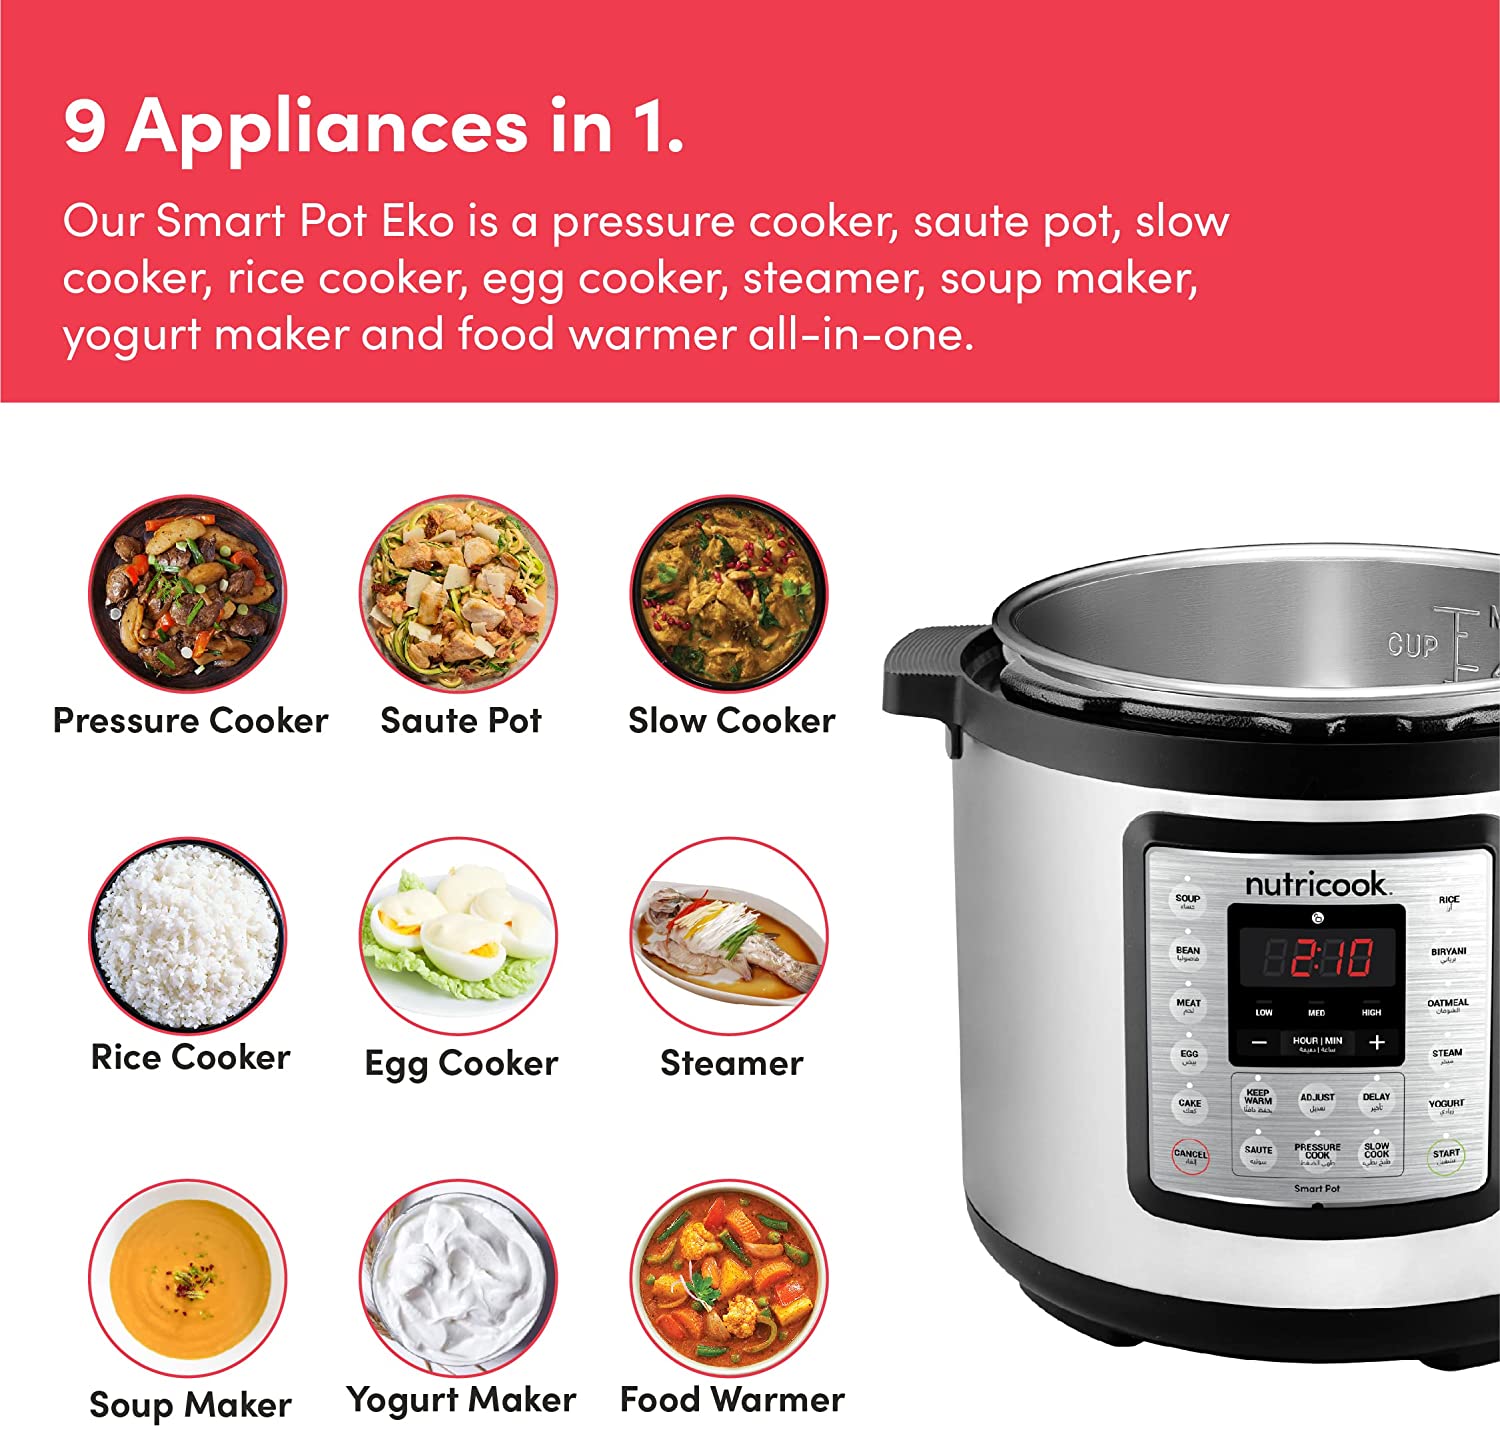 Steamer Saute and Warmer Slow Cooker Instant Pot LUX60 Red Stainless Steel 6 Qt 6-in-1 Multi-Use Programmable Pressure Cooker Rice Cooker 